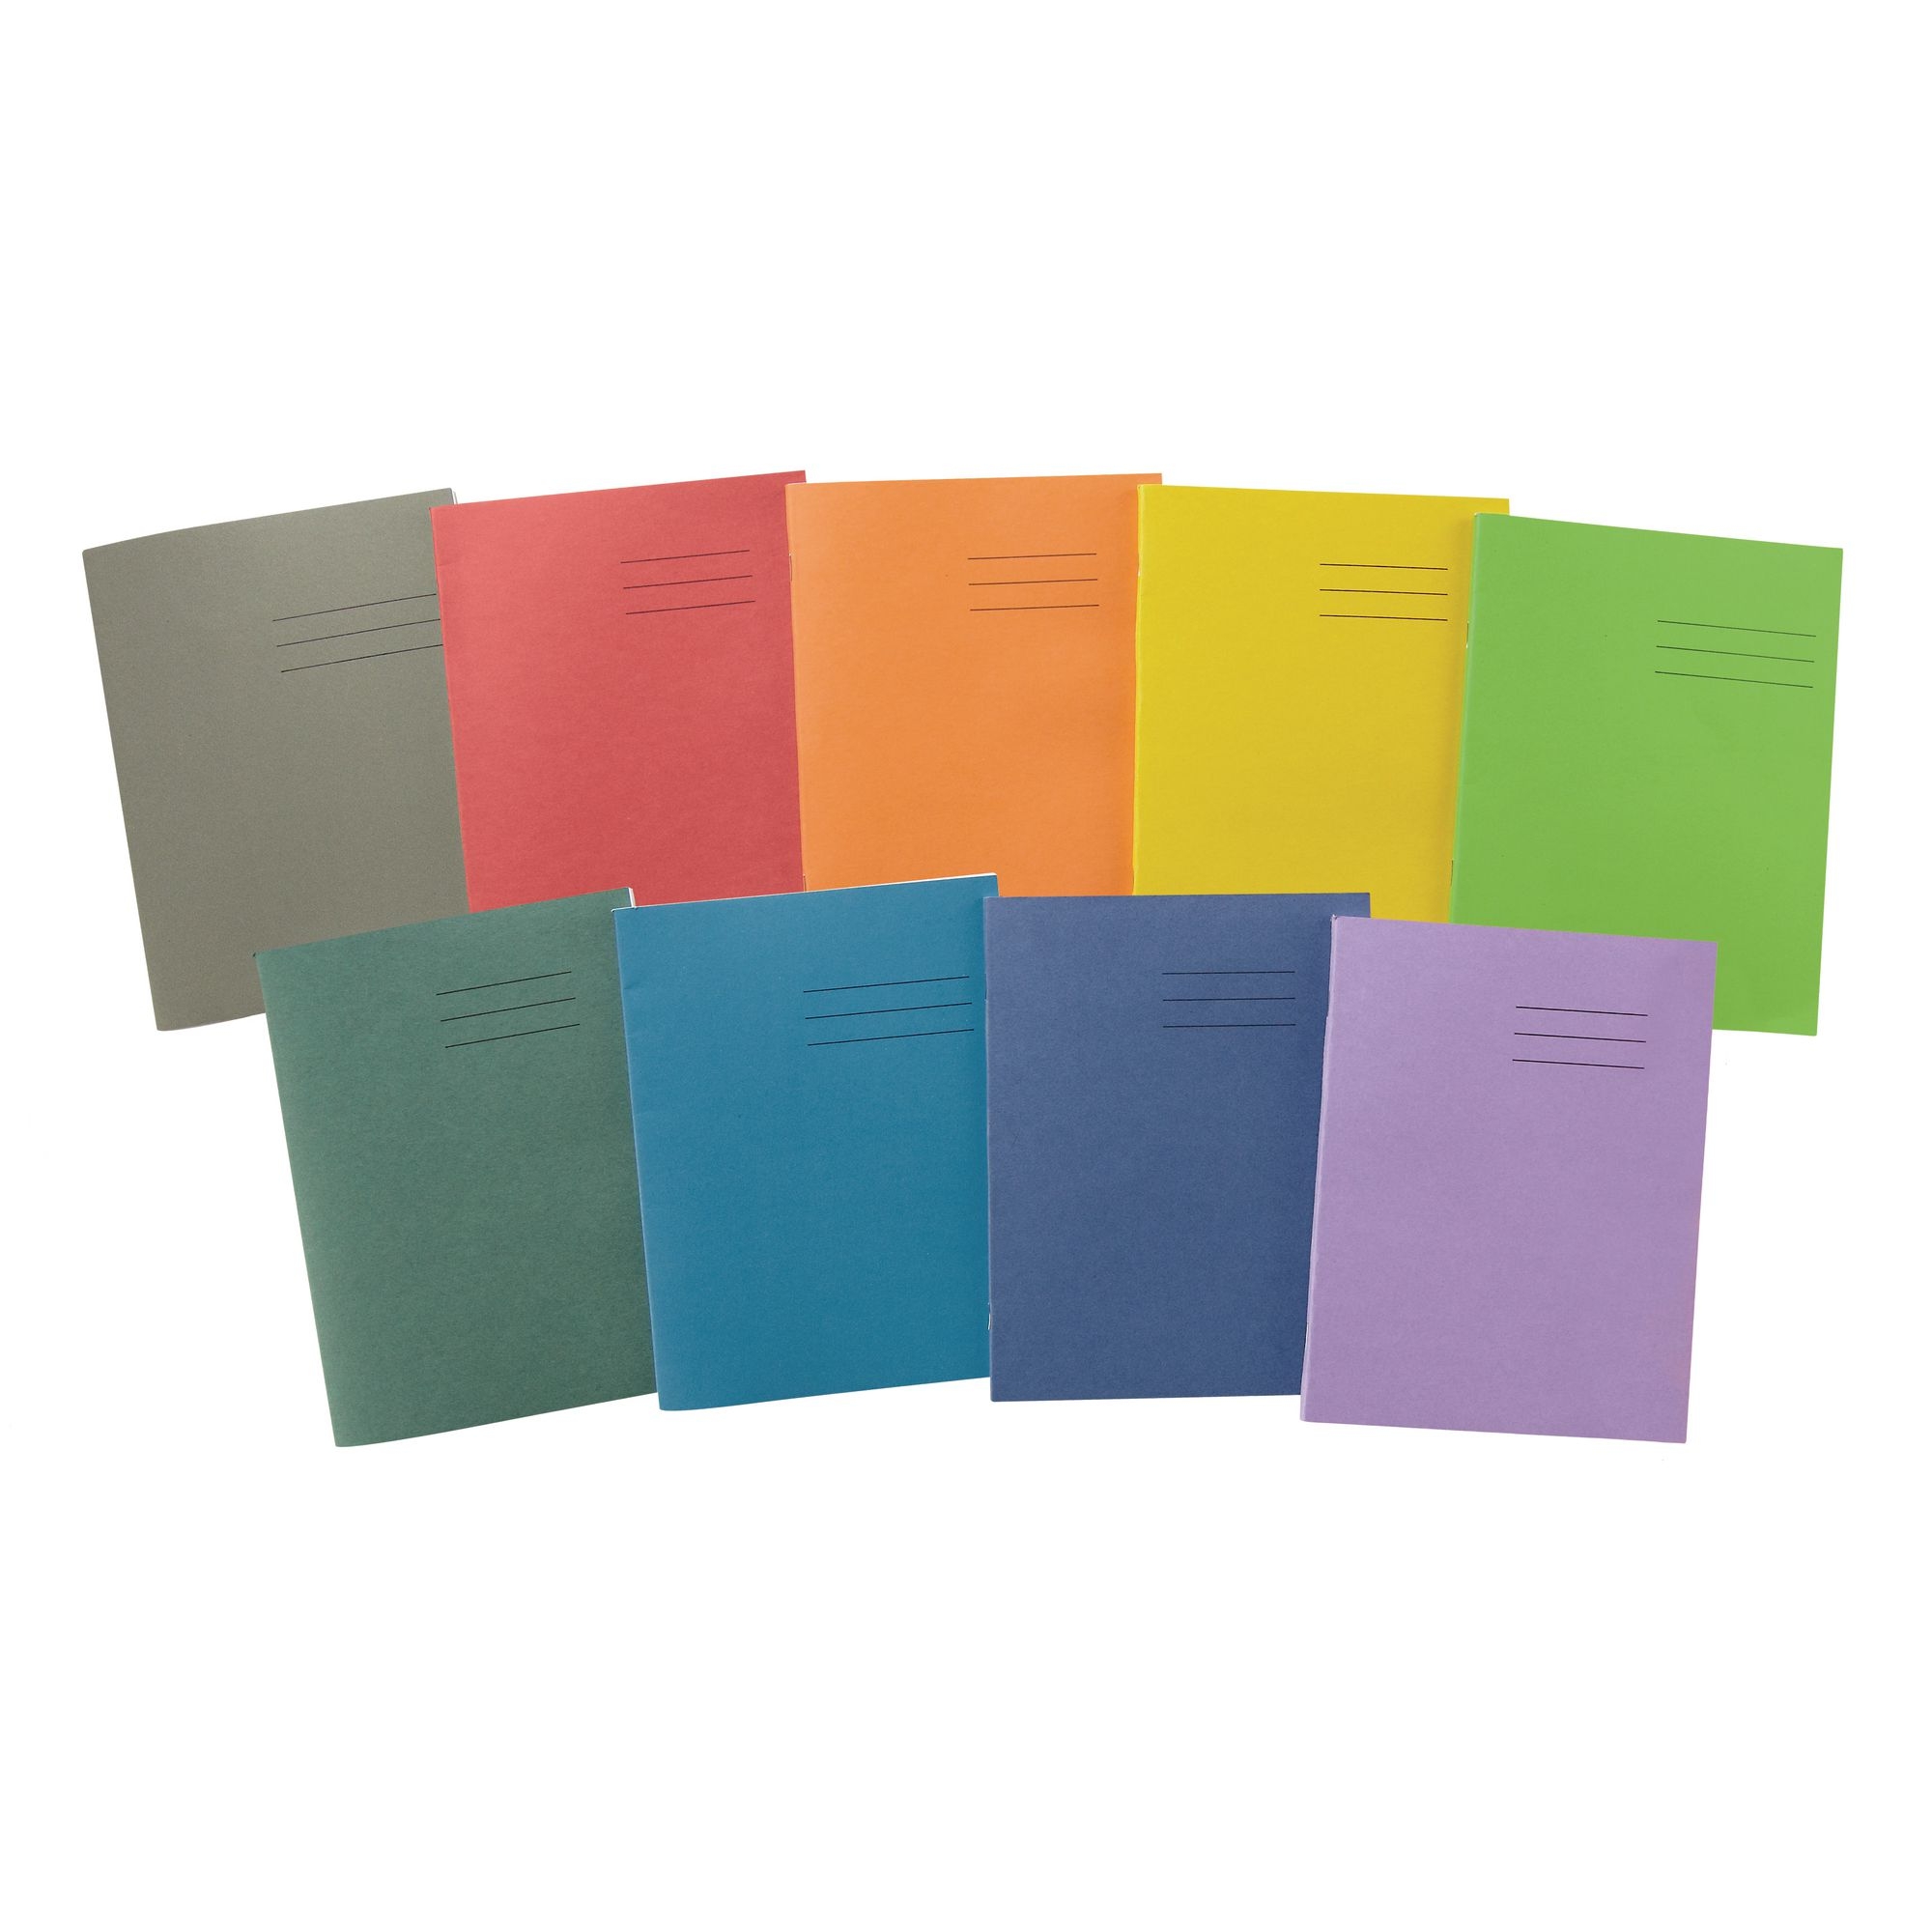 Orange 9x7" Exercise Book 48-Page, 8mm Ruled / Plain Alternative - Pack of 100